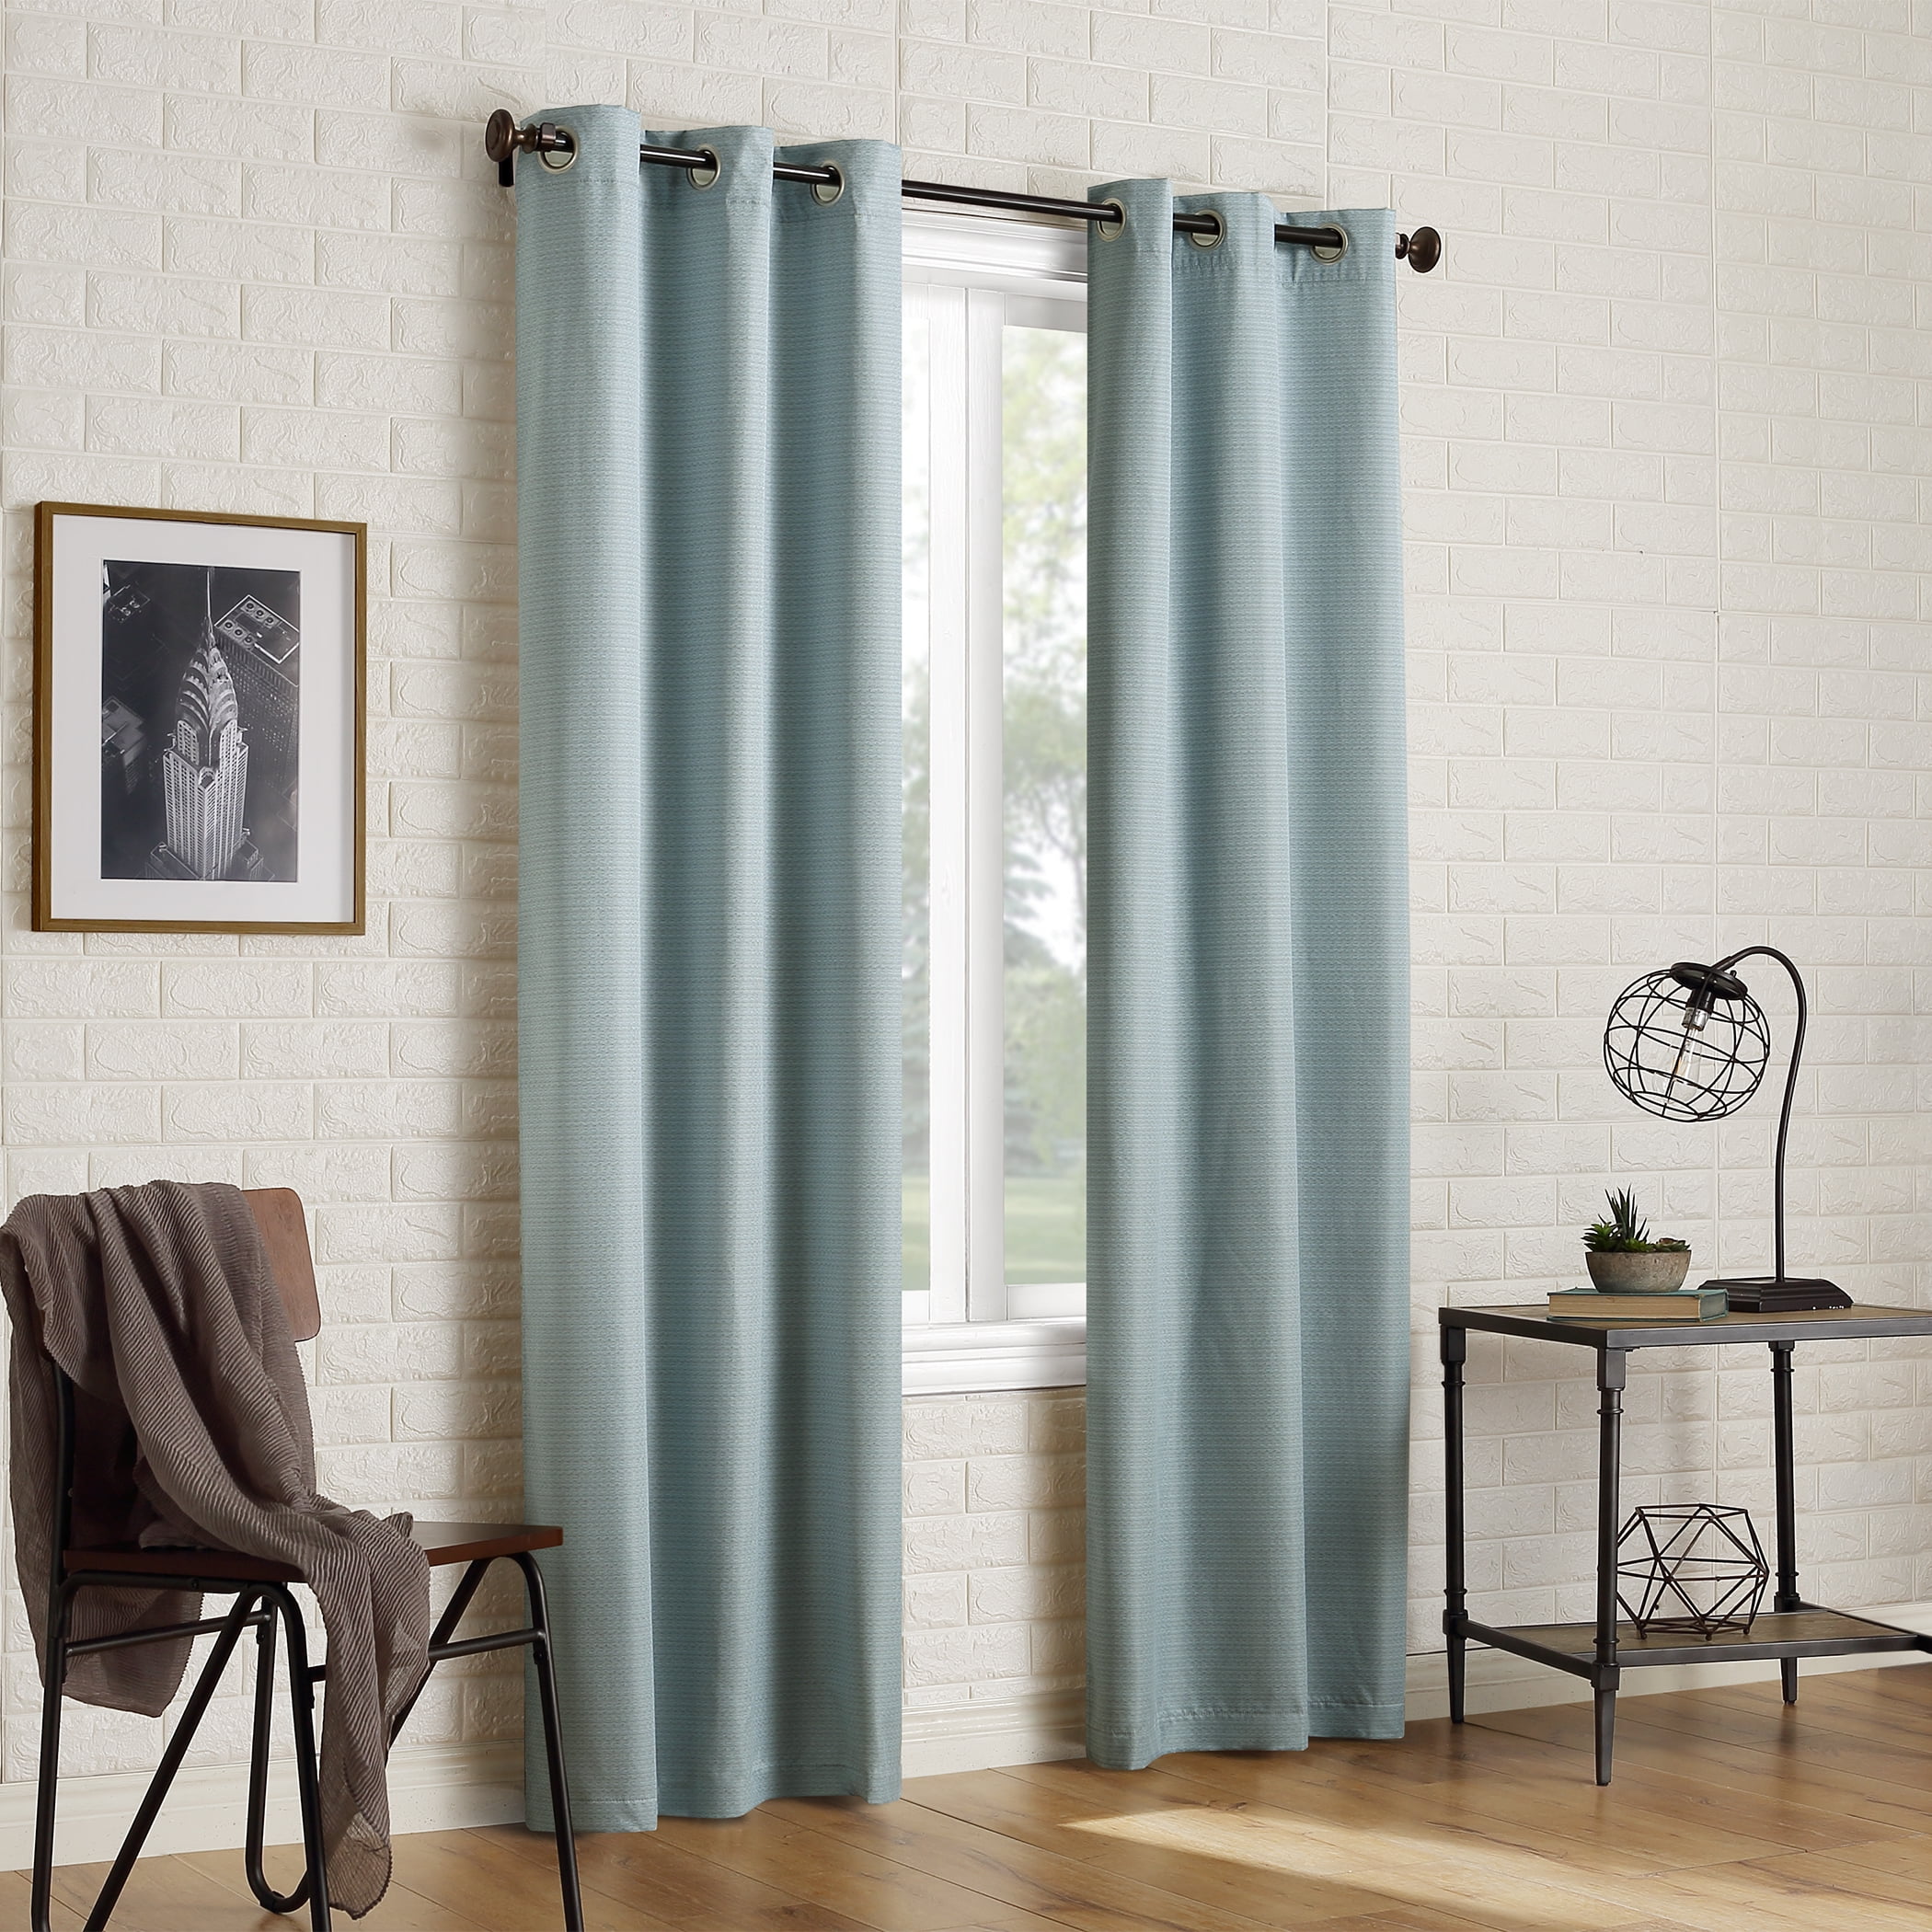 INSULATED FOAM LINED THERMAL BLACKOUT GROMMET WINDOW CURTAIN PANEL 1PC AQUA 